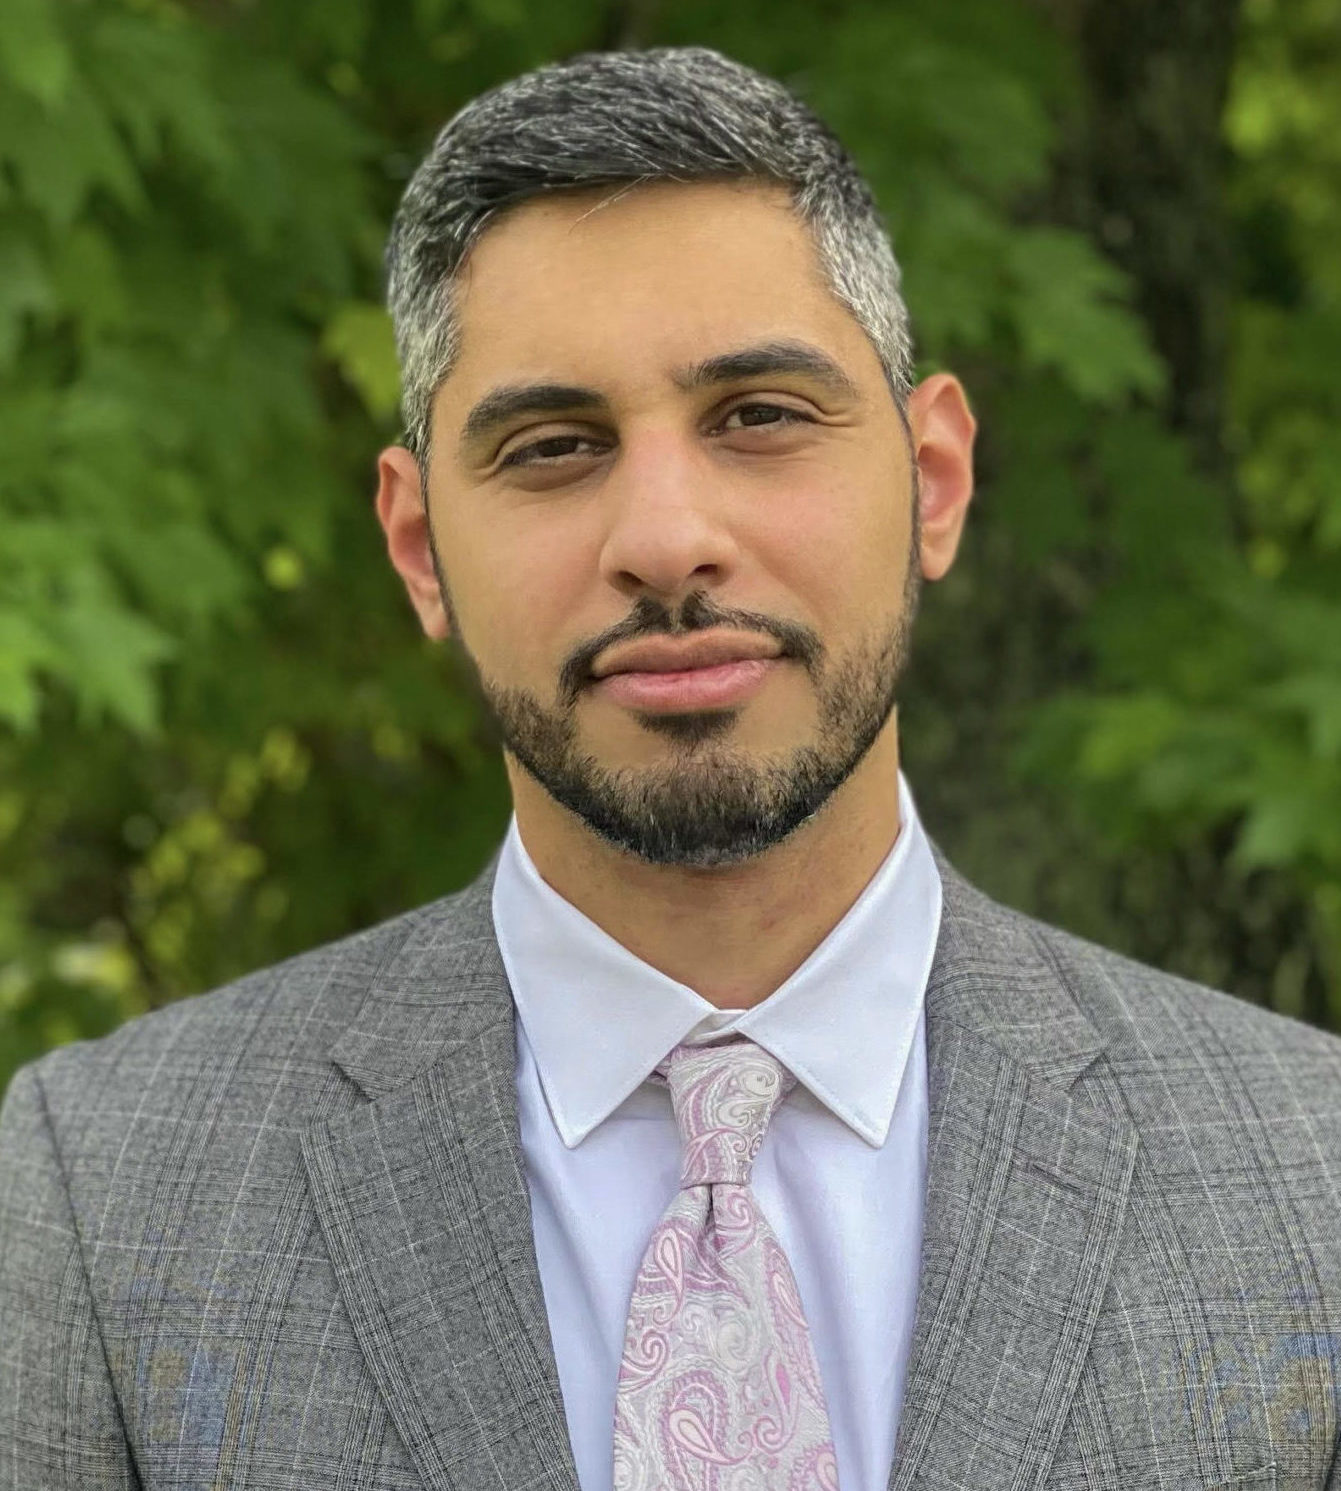 Florida Probate and Family Law Firm Director of Operations Haytham Abukahdeir